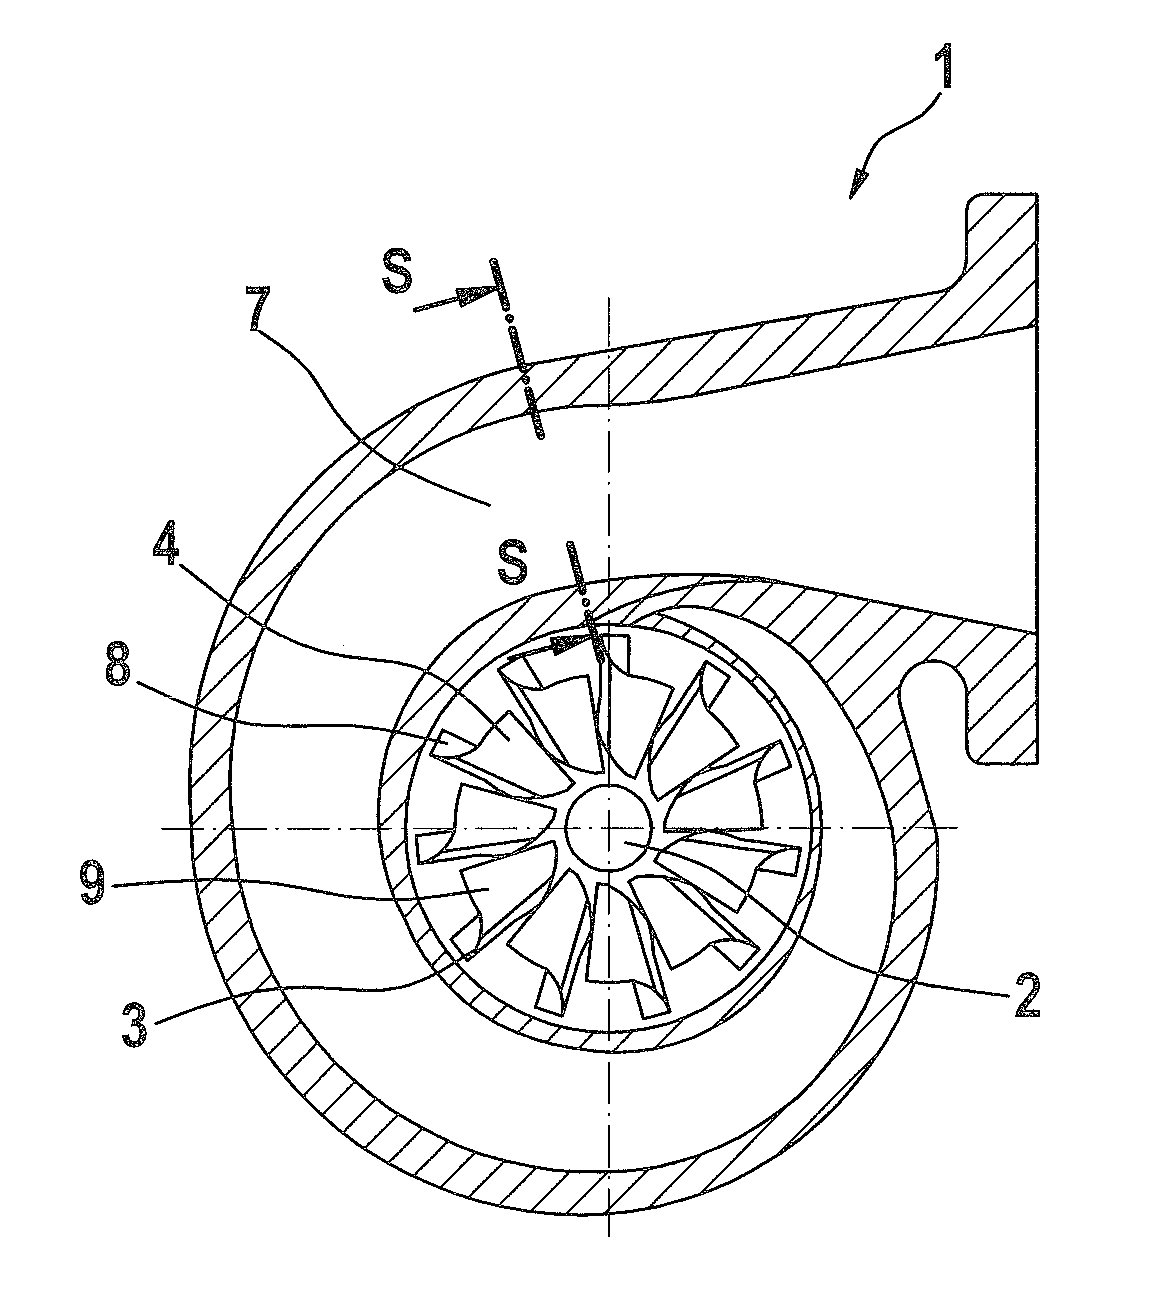 Method and device for determining one or more rotational speeds of a turbocharging device, in particular for an internal combustion engine